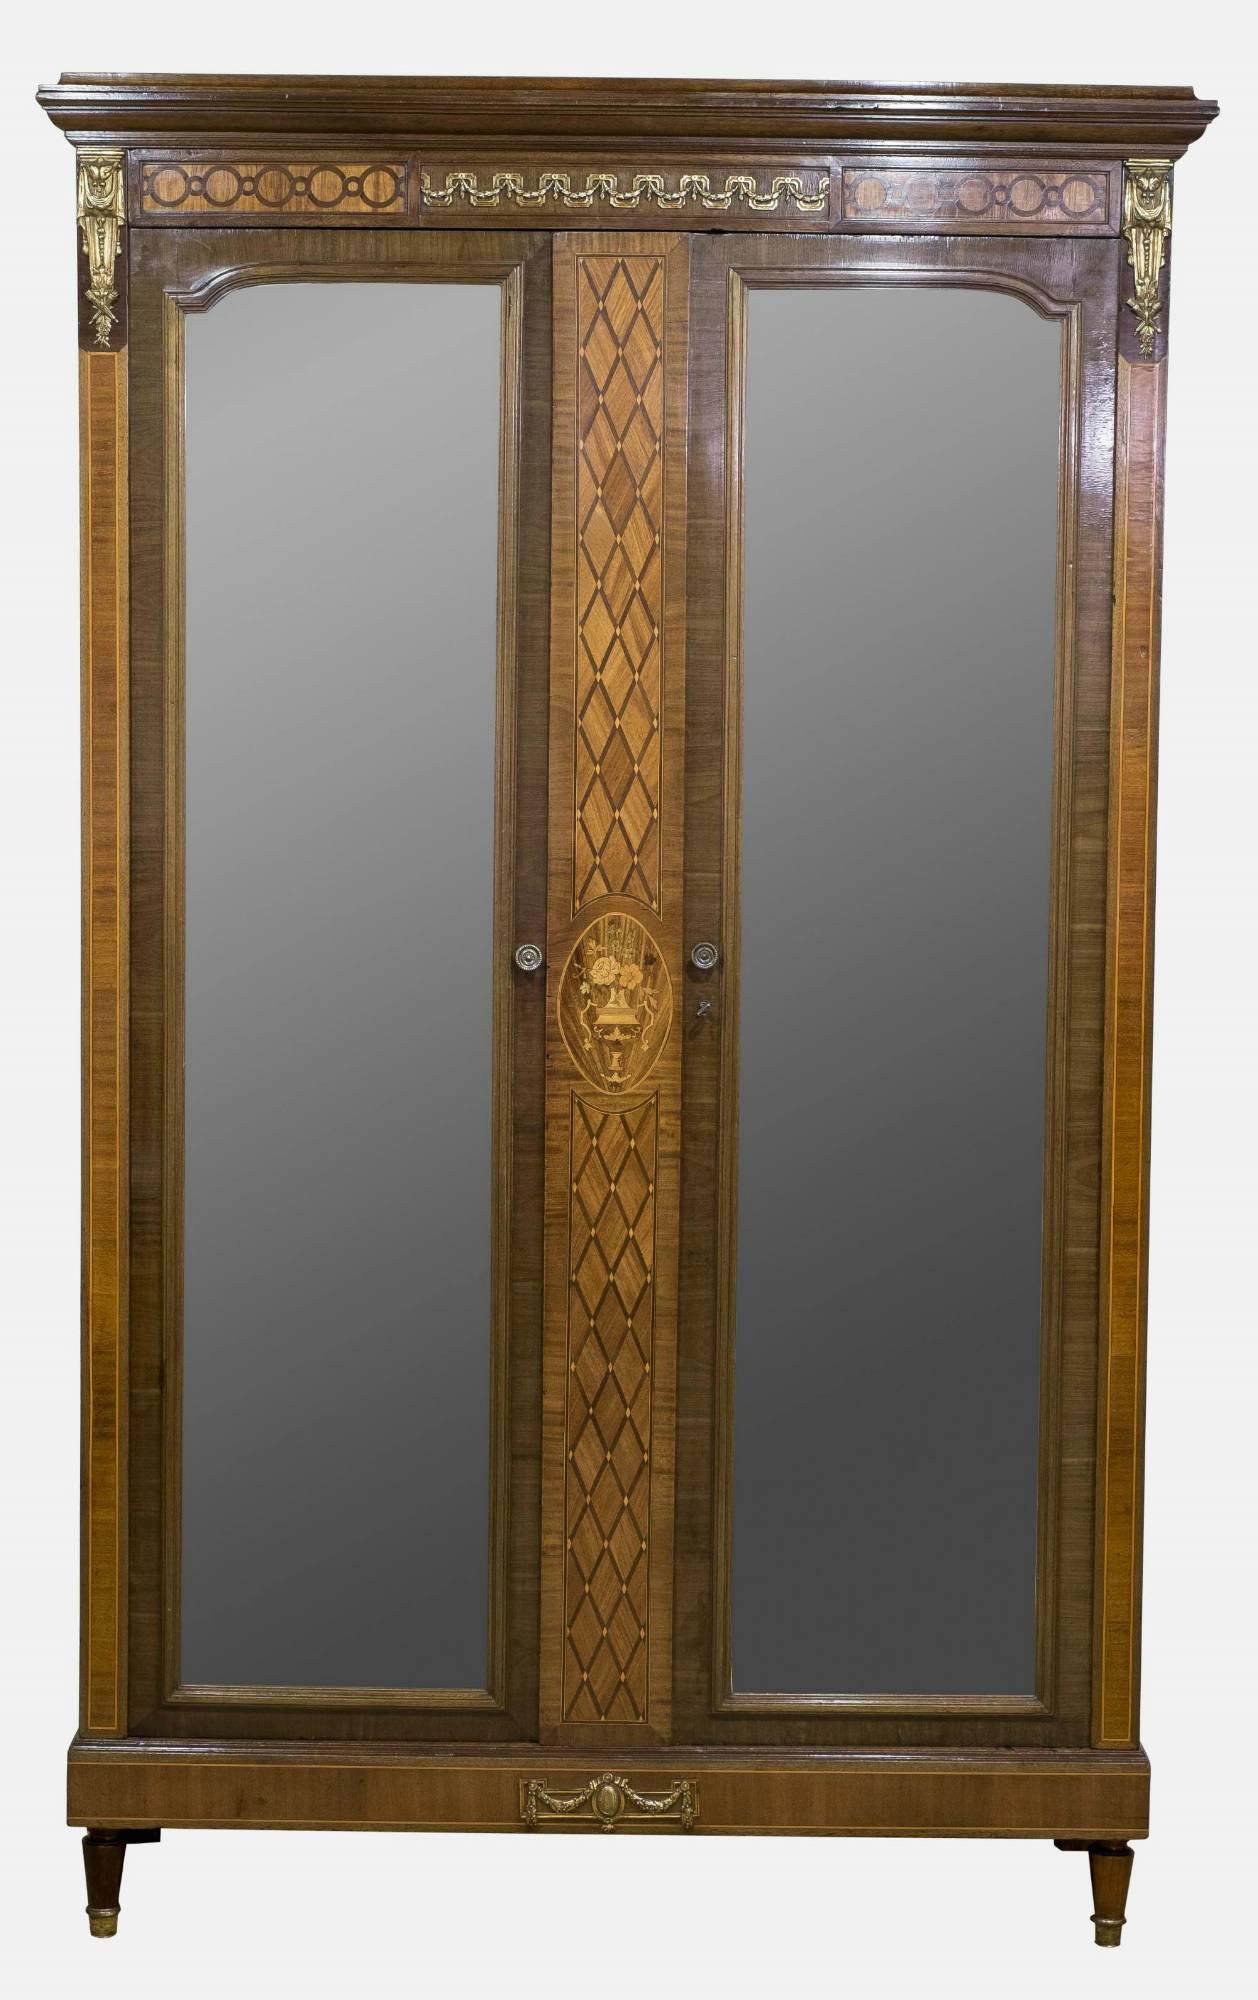 A fine French mahogany and kingwood two-door armoire with boxwood inlay and ormolu mounts.